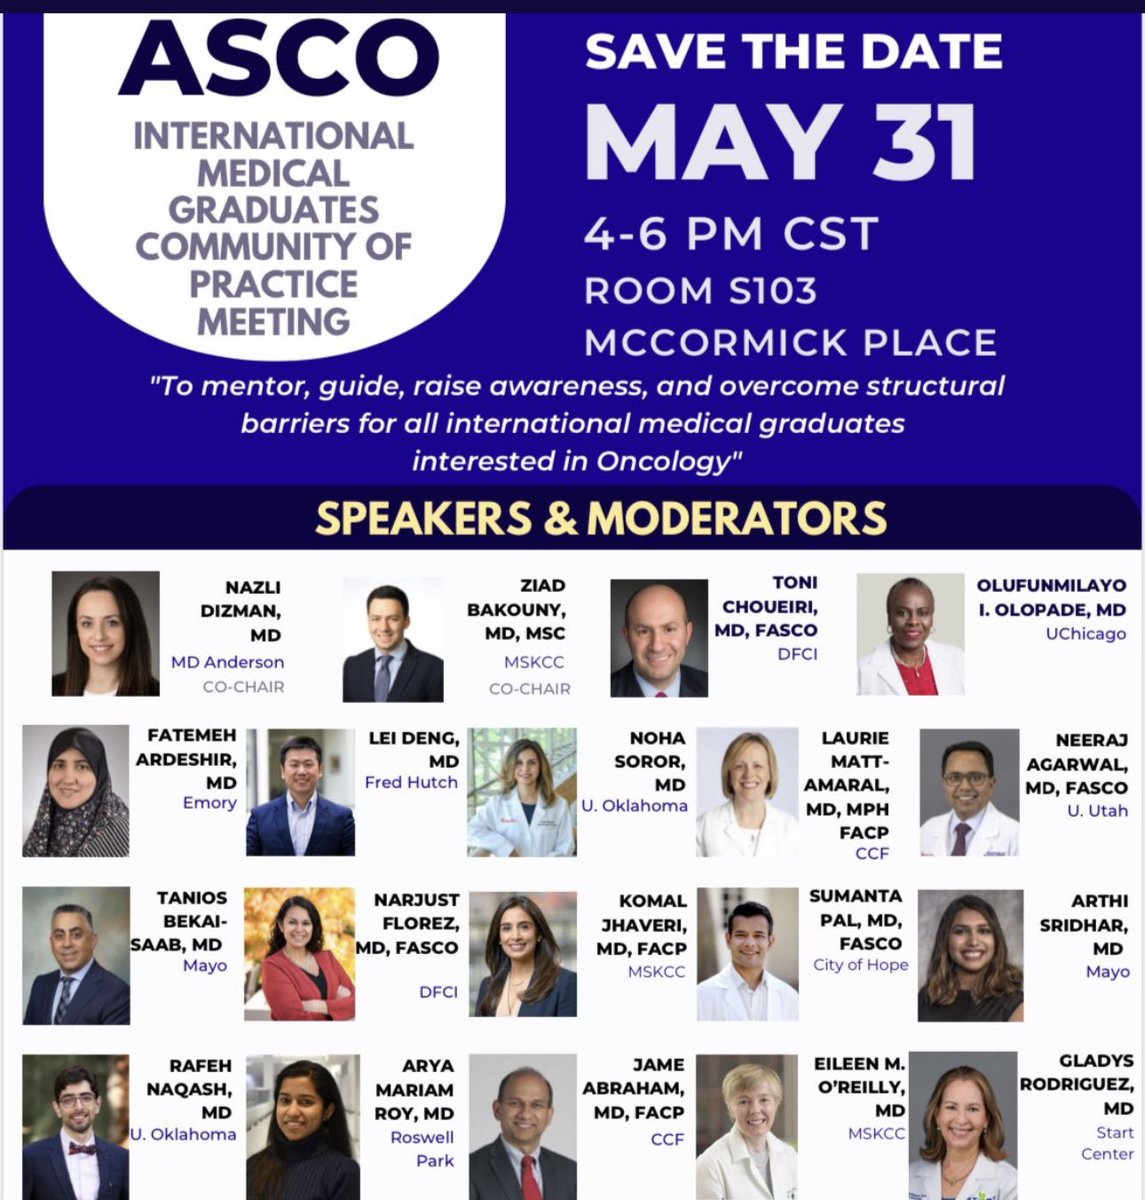 Please join us for our 2nd annual meeting of the @ASCO IMG Community of Practice! We have a terrific agenda and lineup of speakers! #ASCO24 @ZiadBakouny @NazliDizman @neerajaiims @noha_soror @GIcancerDoc @NarjustFlorezMD @montypal @thenasheffect @OncoAlert @IMG_Oncologists